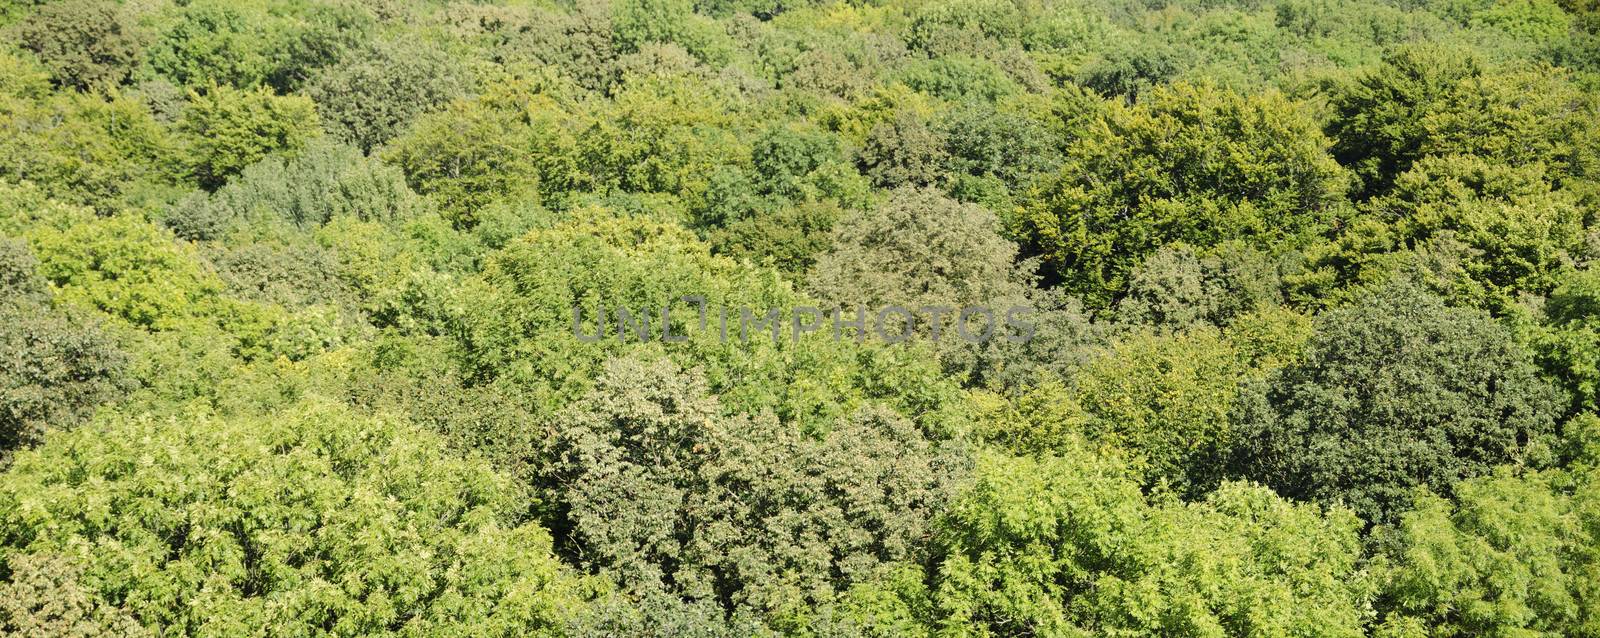 Deciduous beech forest canopy as seen from above in summer in Germany